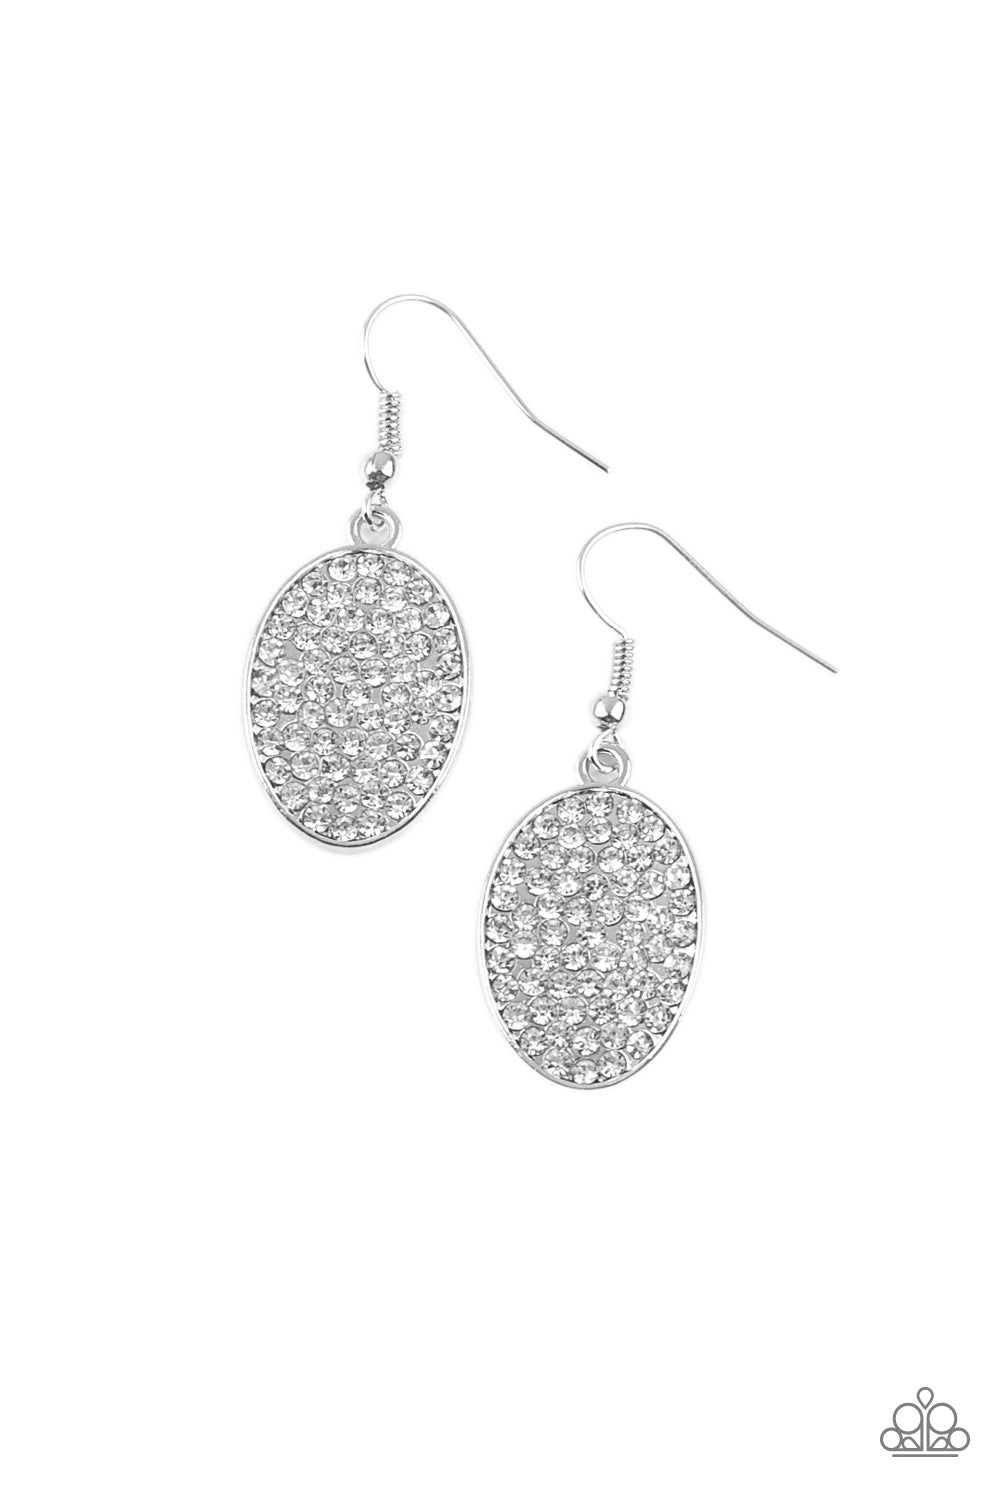 ALL DAZZLE - WHITE ASYMETRICAL OVAL CLEAR RHINESTONES ENCURSTED DAINTY EARRINGS